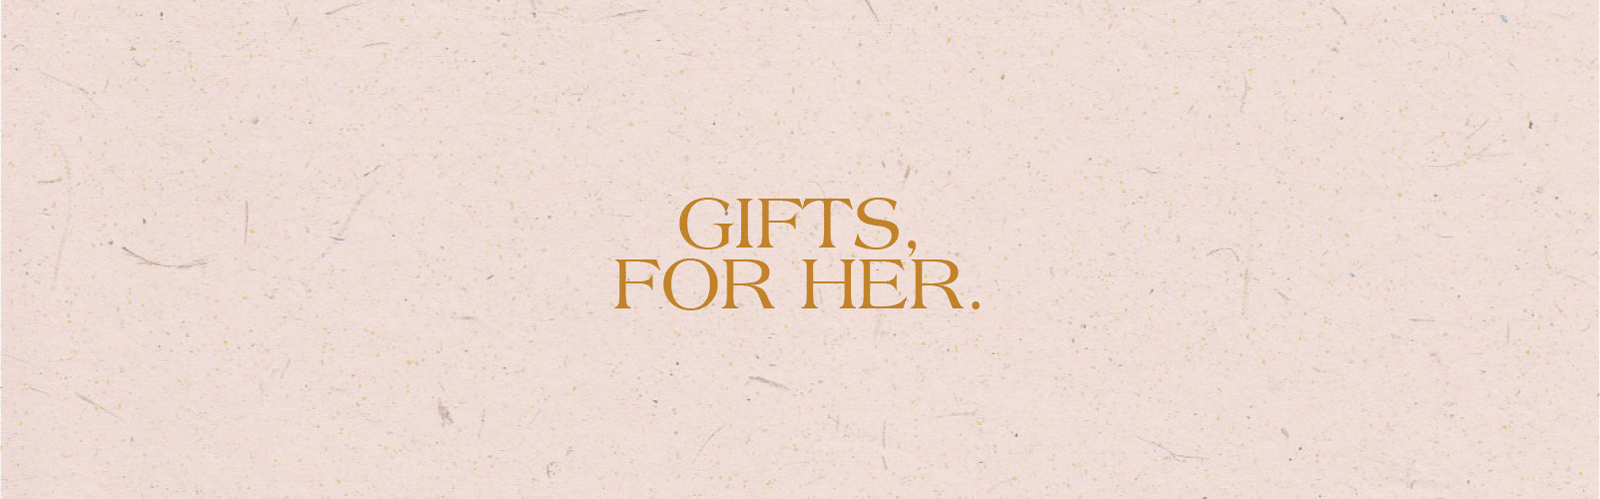 Mother's Day Gift Guide - From Her. For Her.